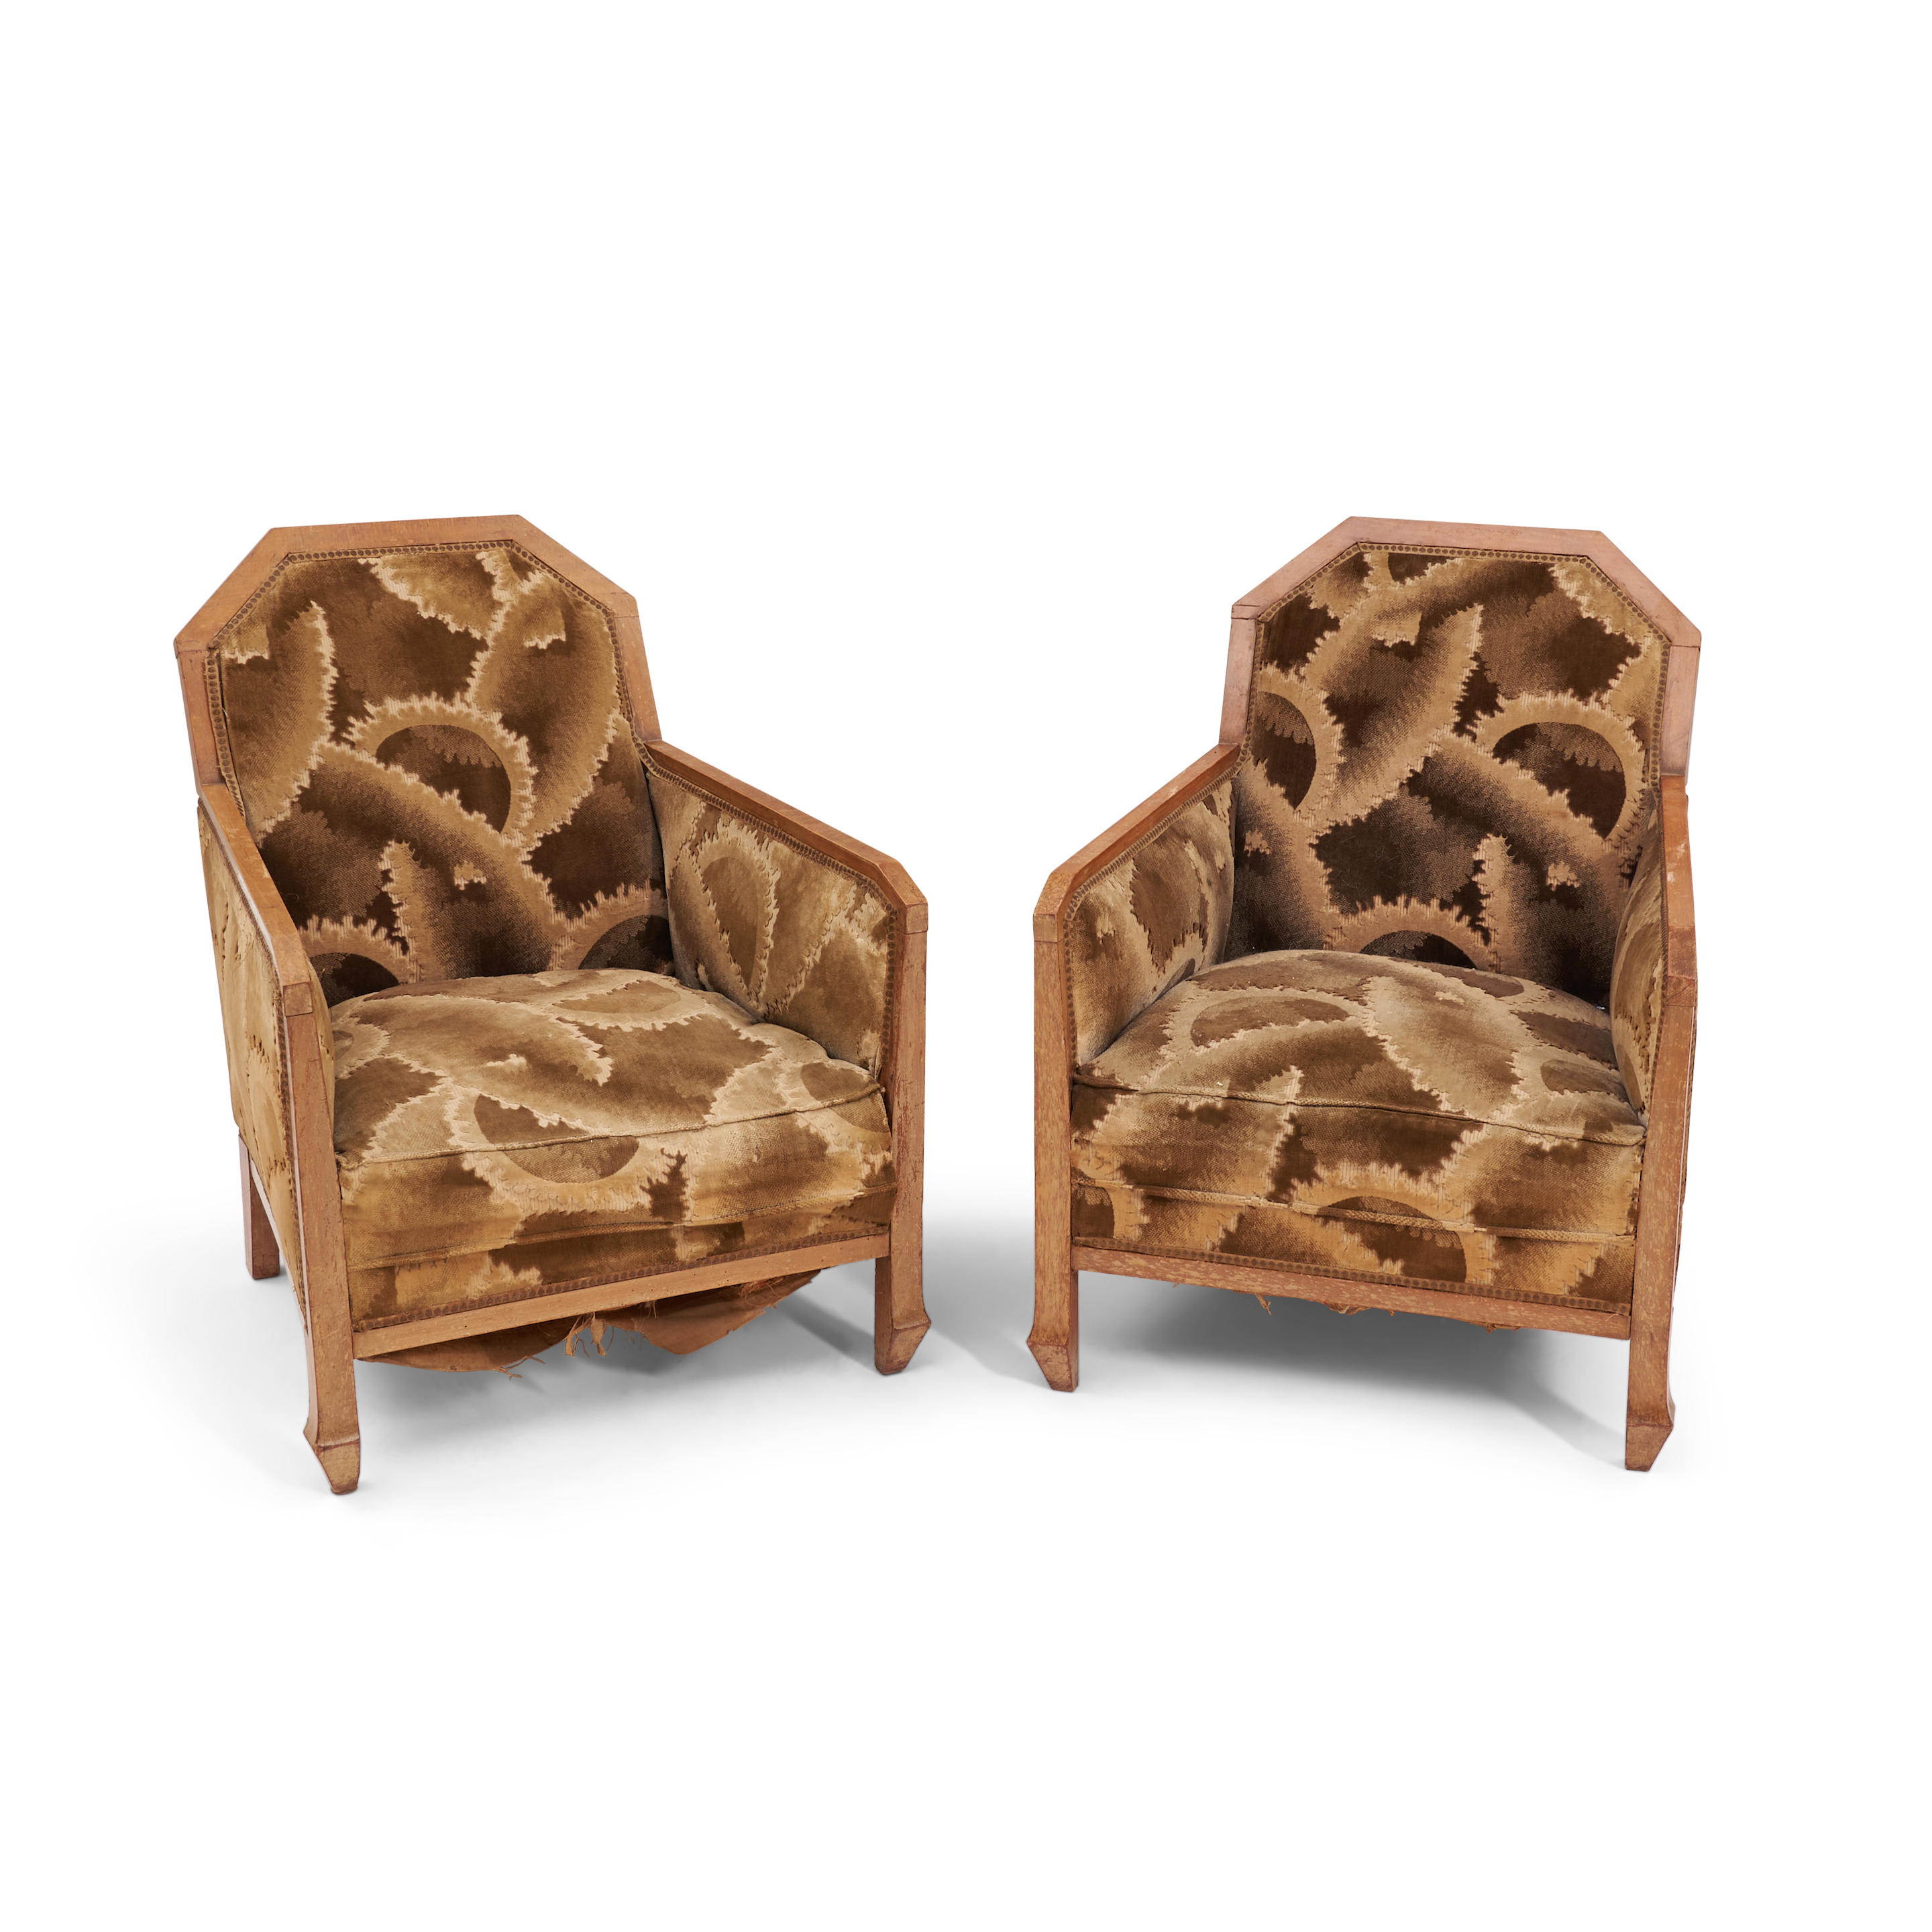 PAIR OF ART DECO STYLE FRUITWOOD 3ae7bc